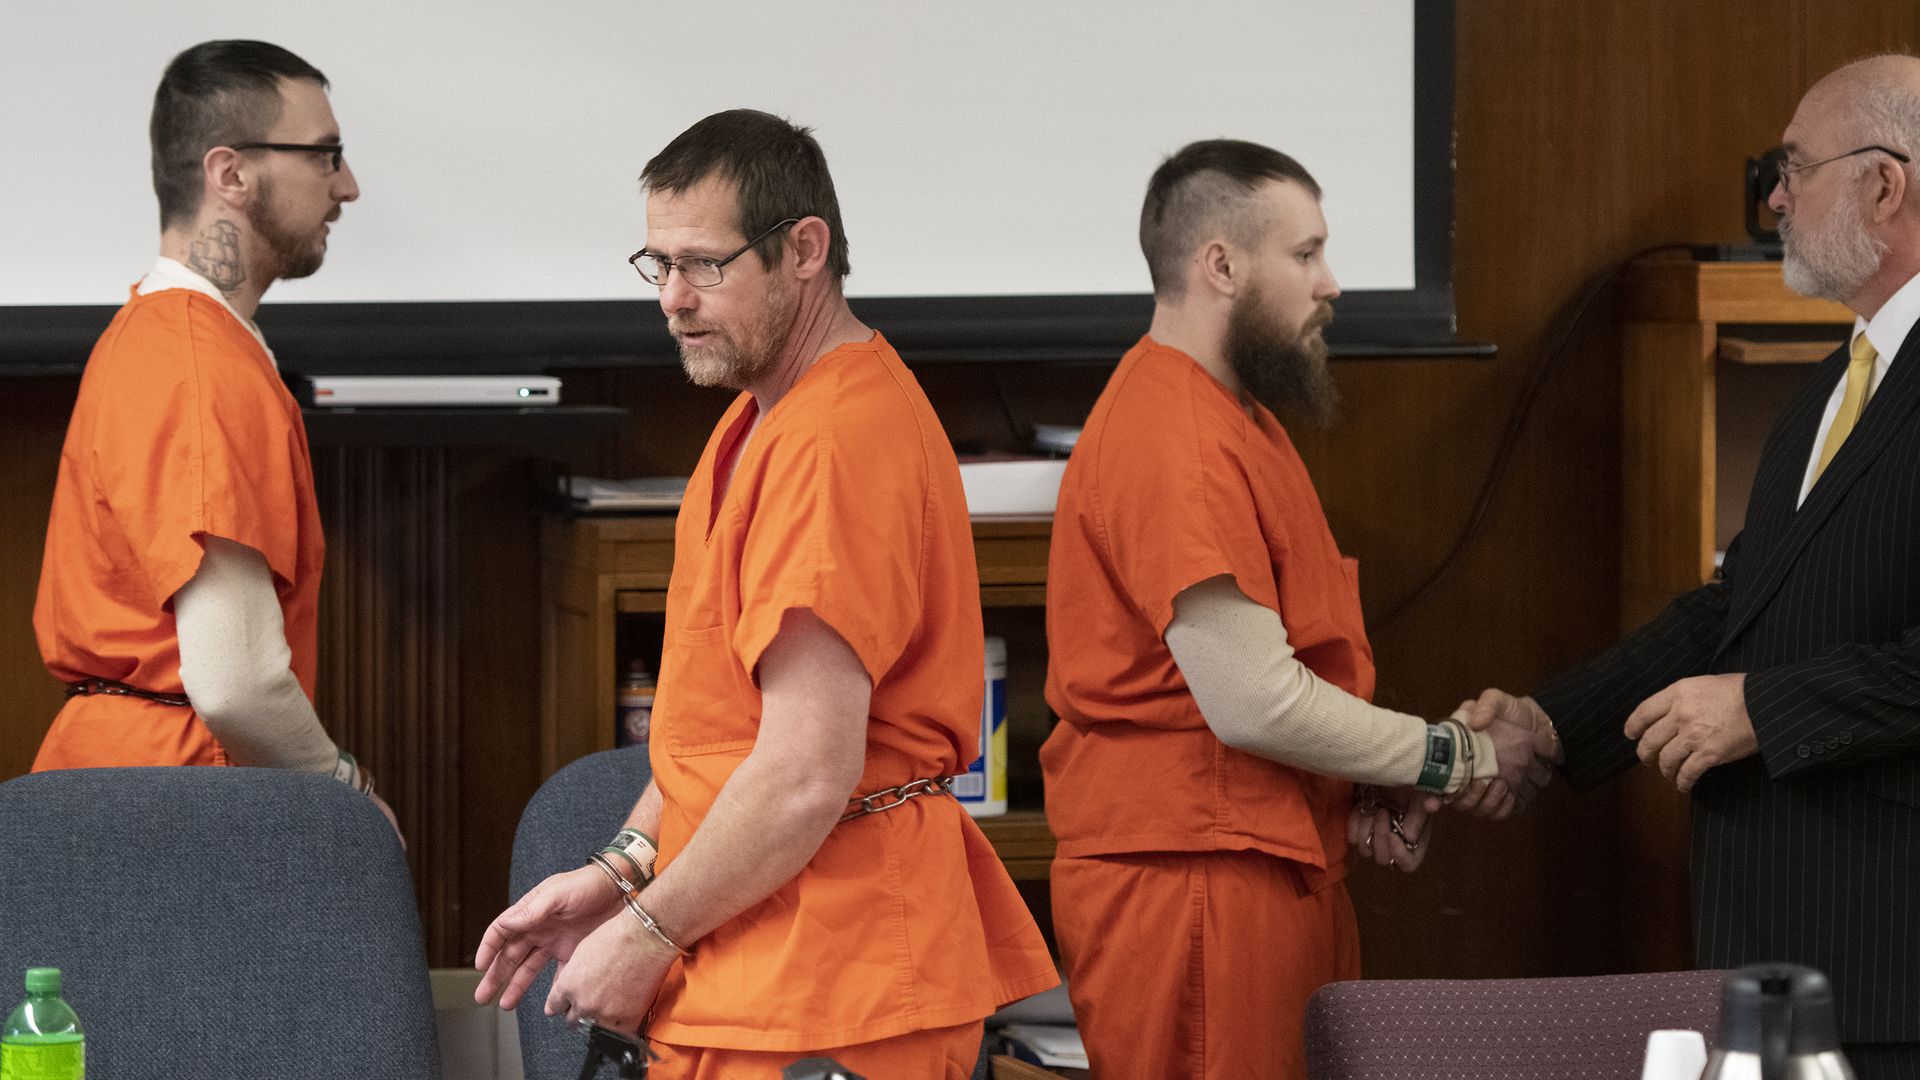 the three prisoners in handcuffs and wearing orange jumpsuits in court